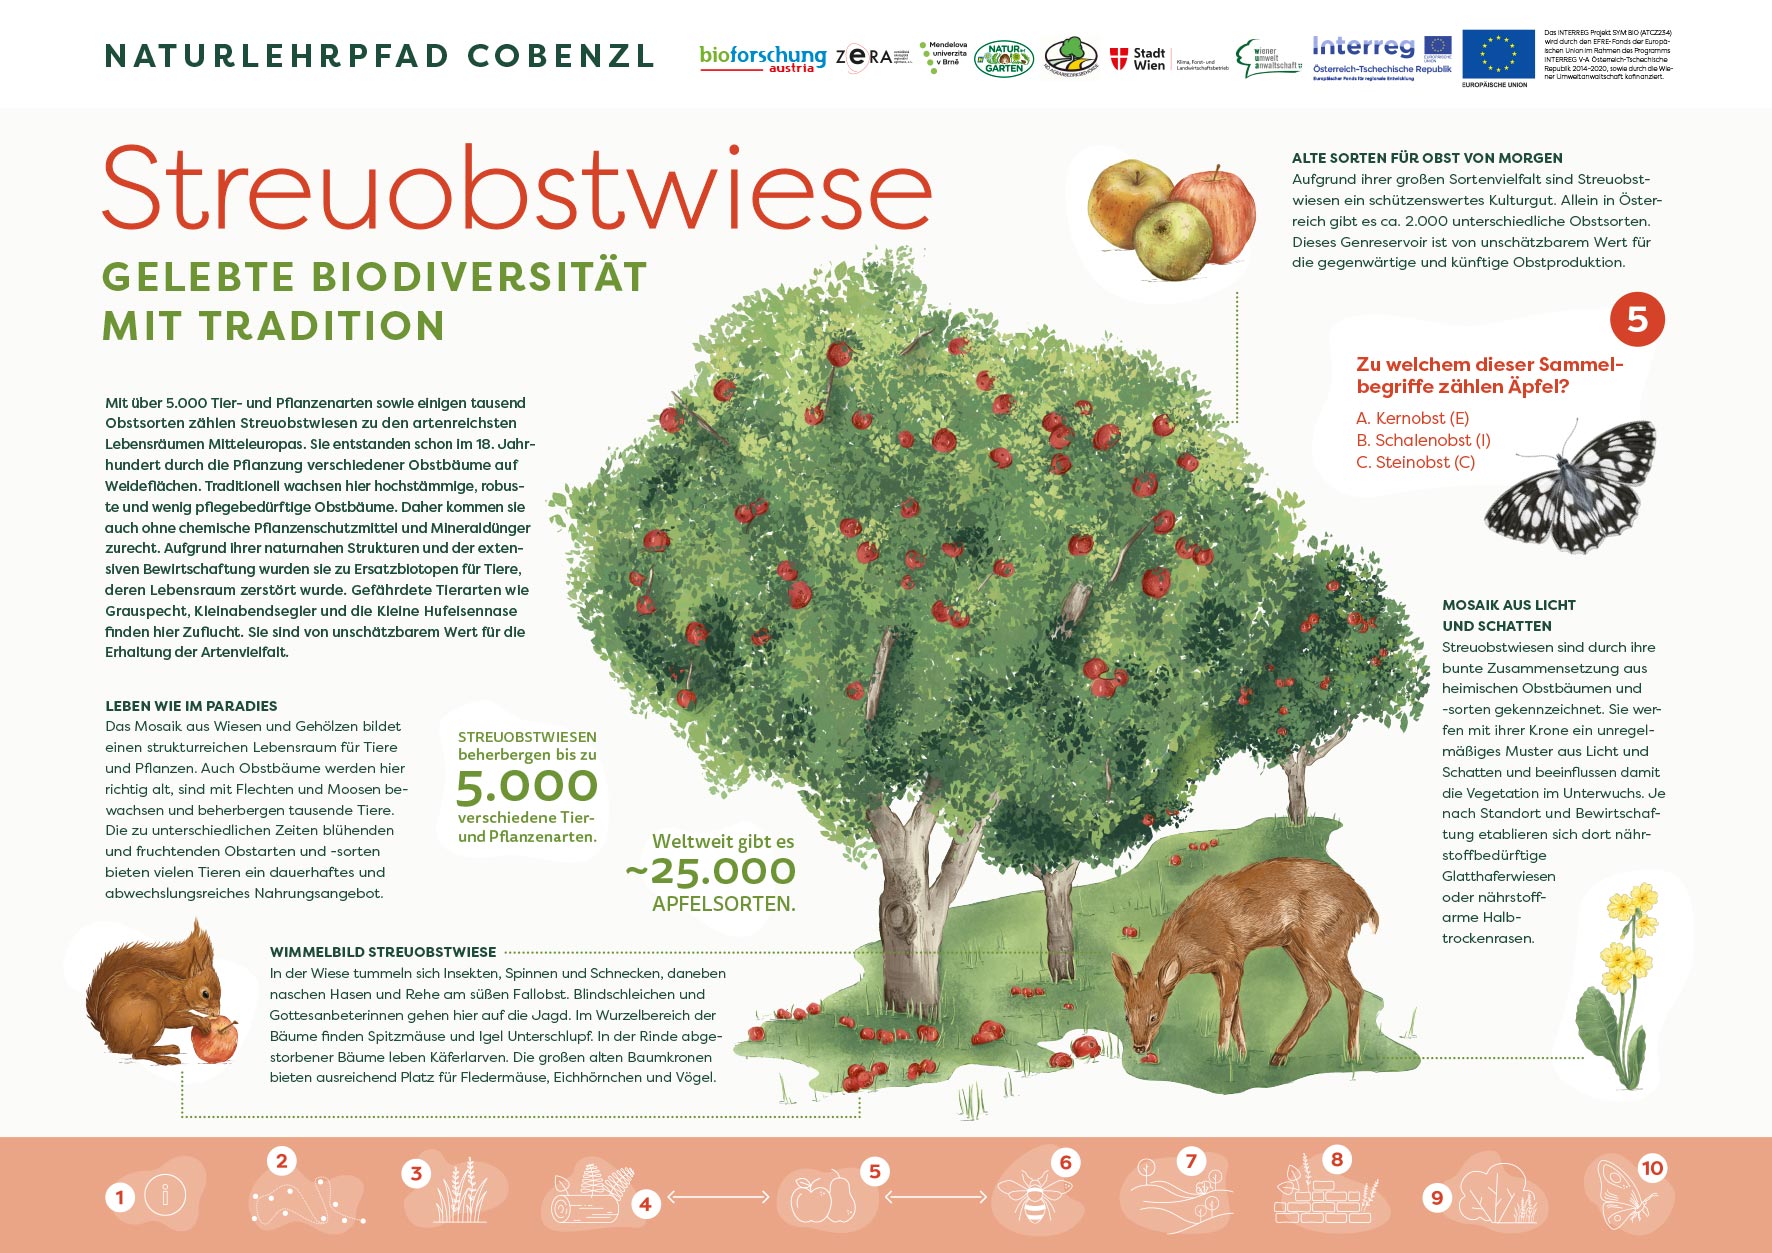 05_streuobstwiese_illustration